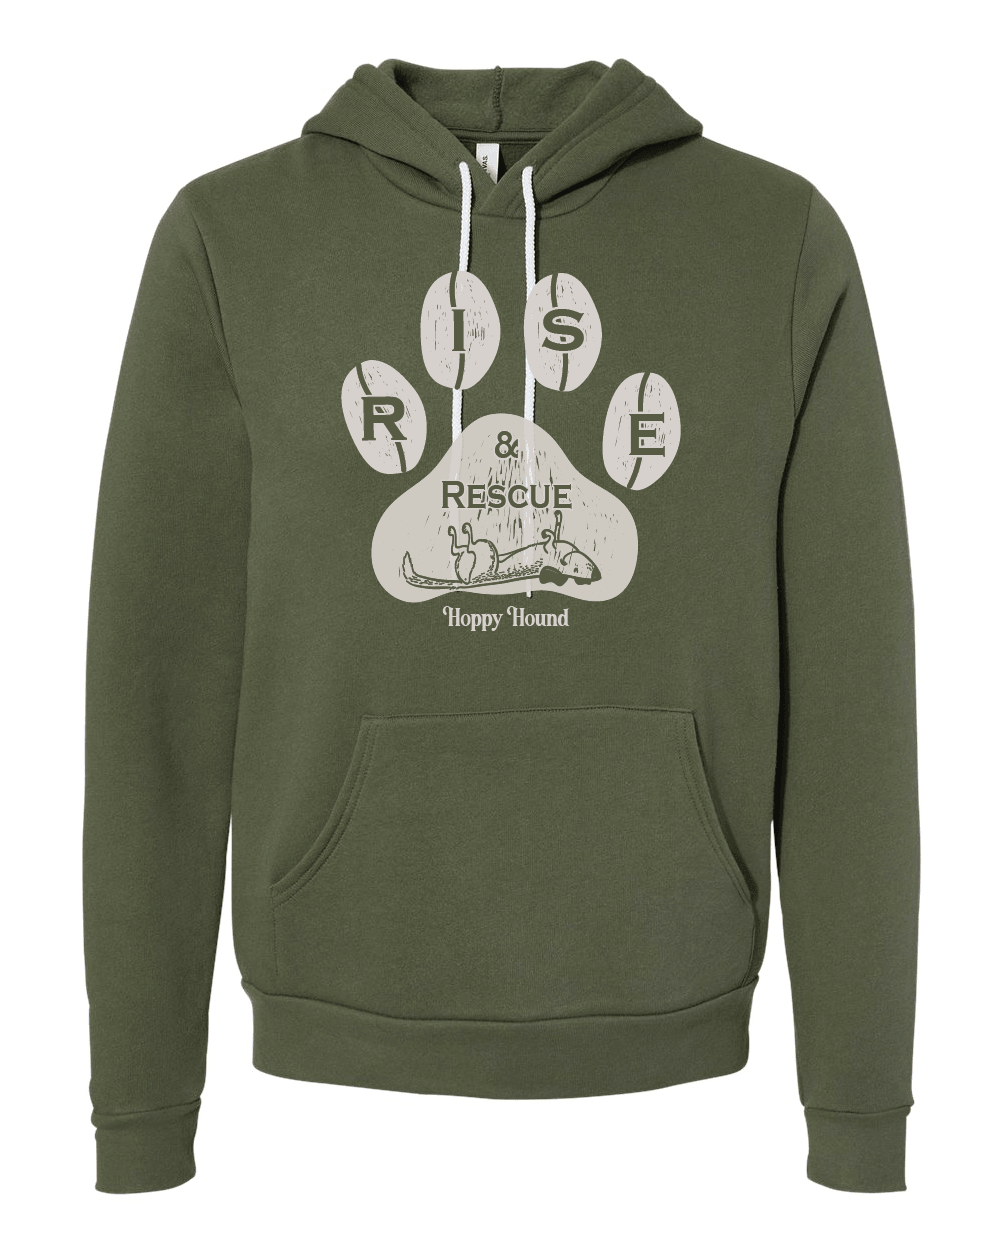 Rise and Rescue Sweatshirt - Ales to Trails